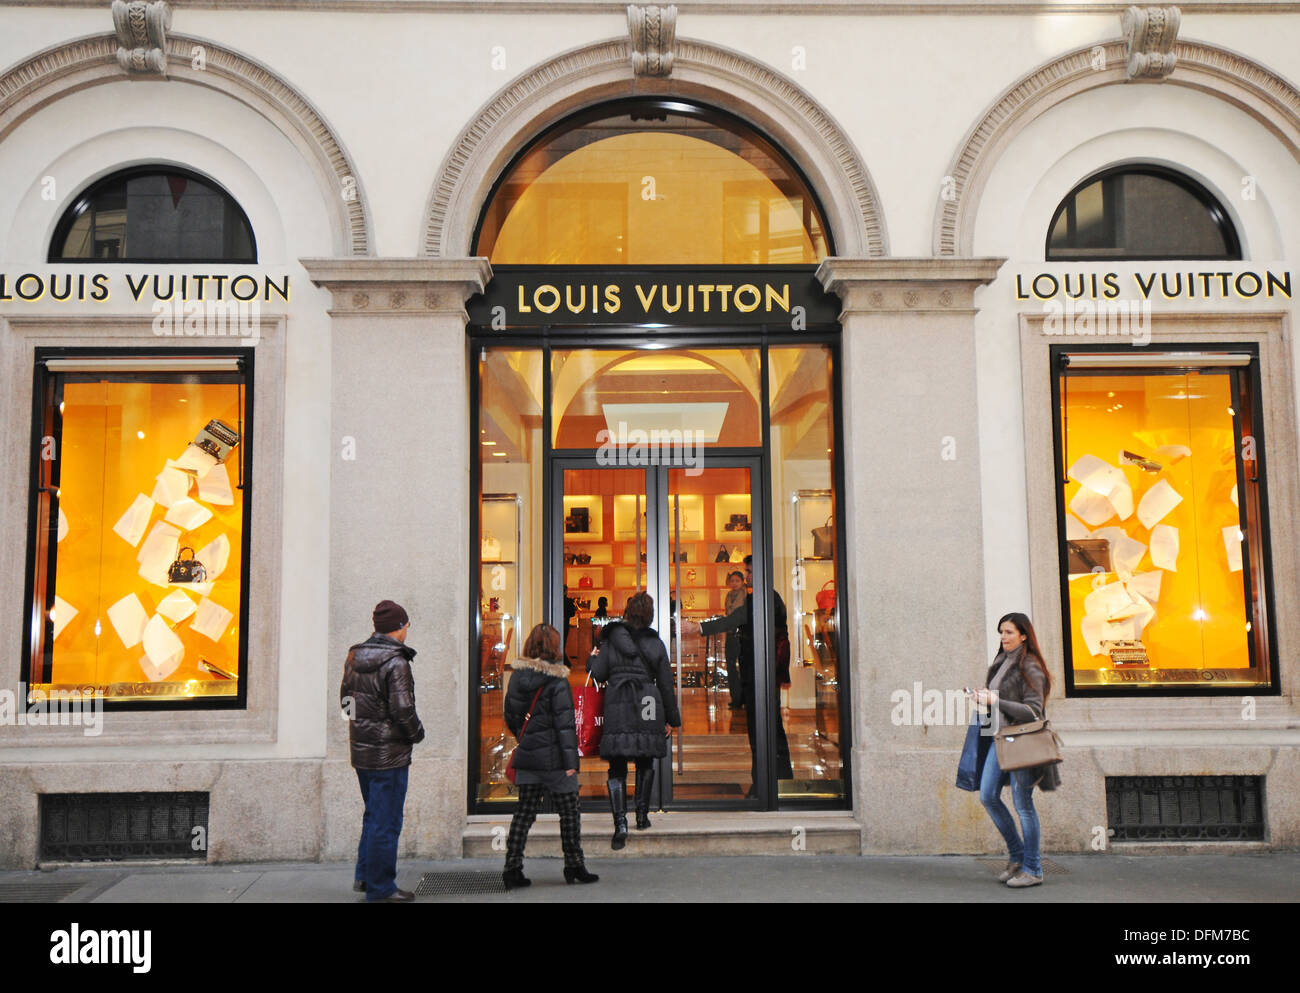 Louis Vuitton Store In Milan Italy | Confederated Tribes of the Umatilla Indian Reservation